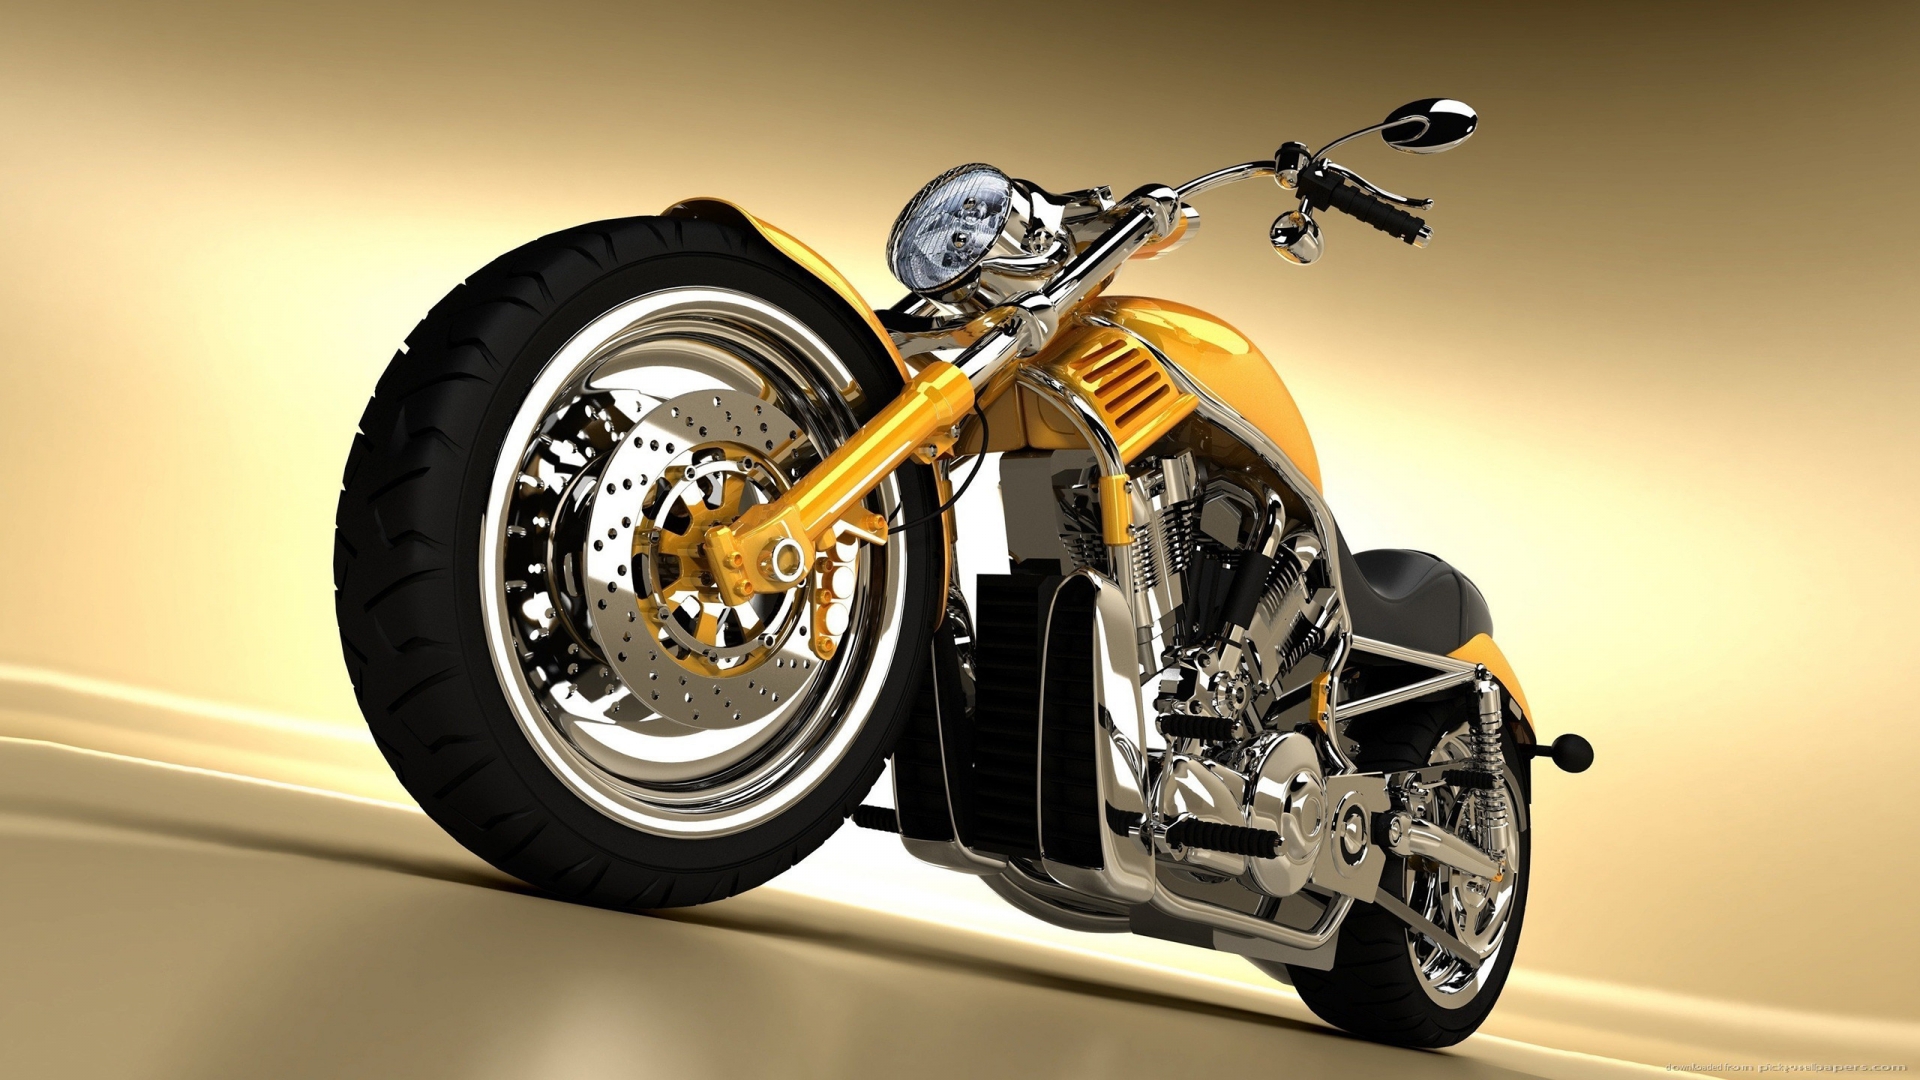 Gorgeous Yellow Chopper for 1920 x 1080 HDTV 1080p resolution